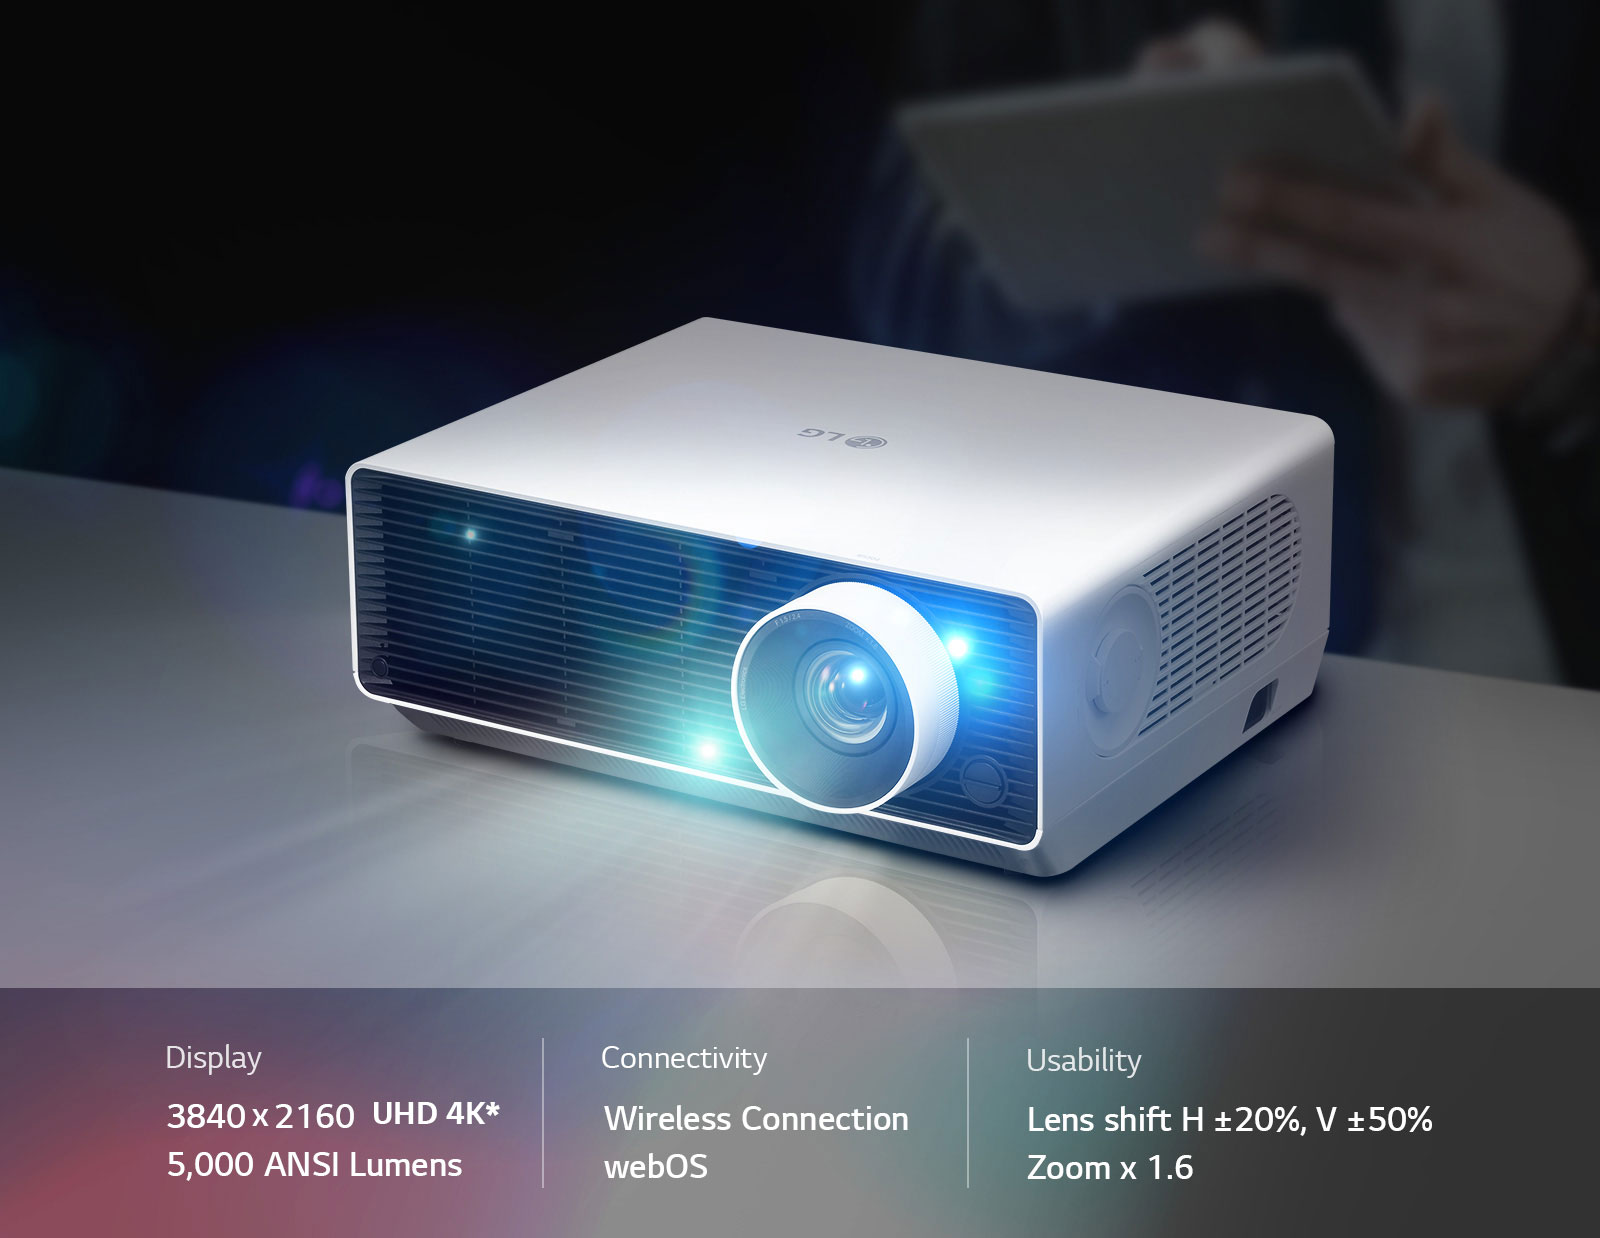 Display : 3840 x 2160 4K UHD / 5,000 ANSI Lumens , Smart : Wireless Connection/webOS , Usability : Lens shift H ±20%, V ±50% / Zoonm x 1.6